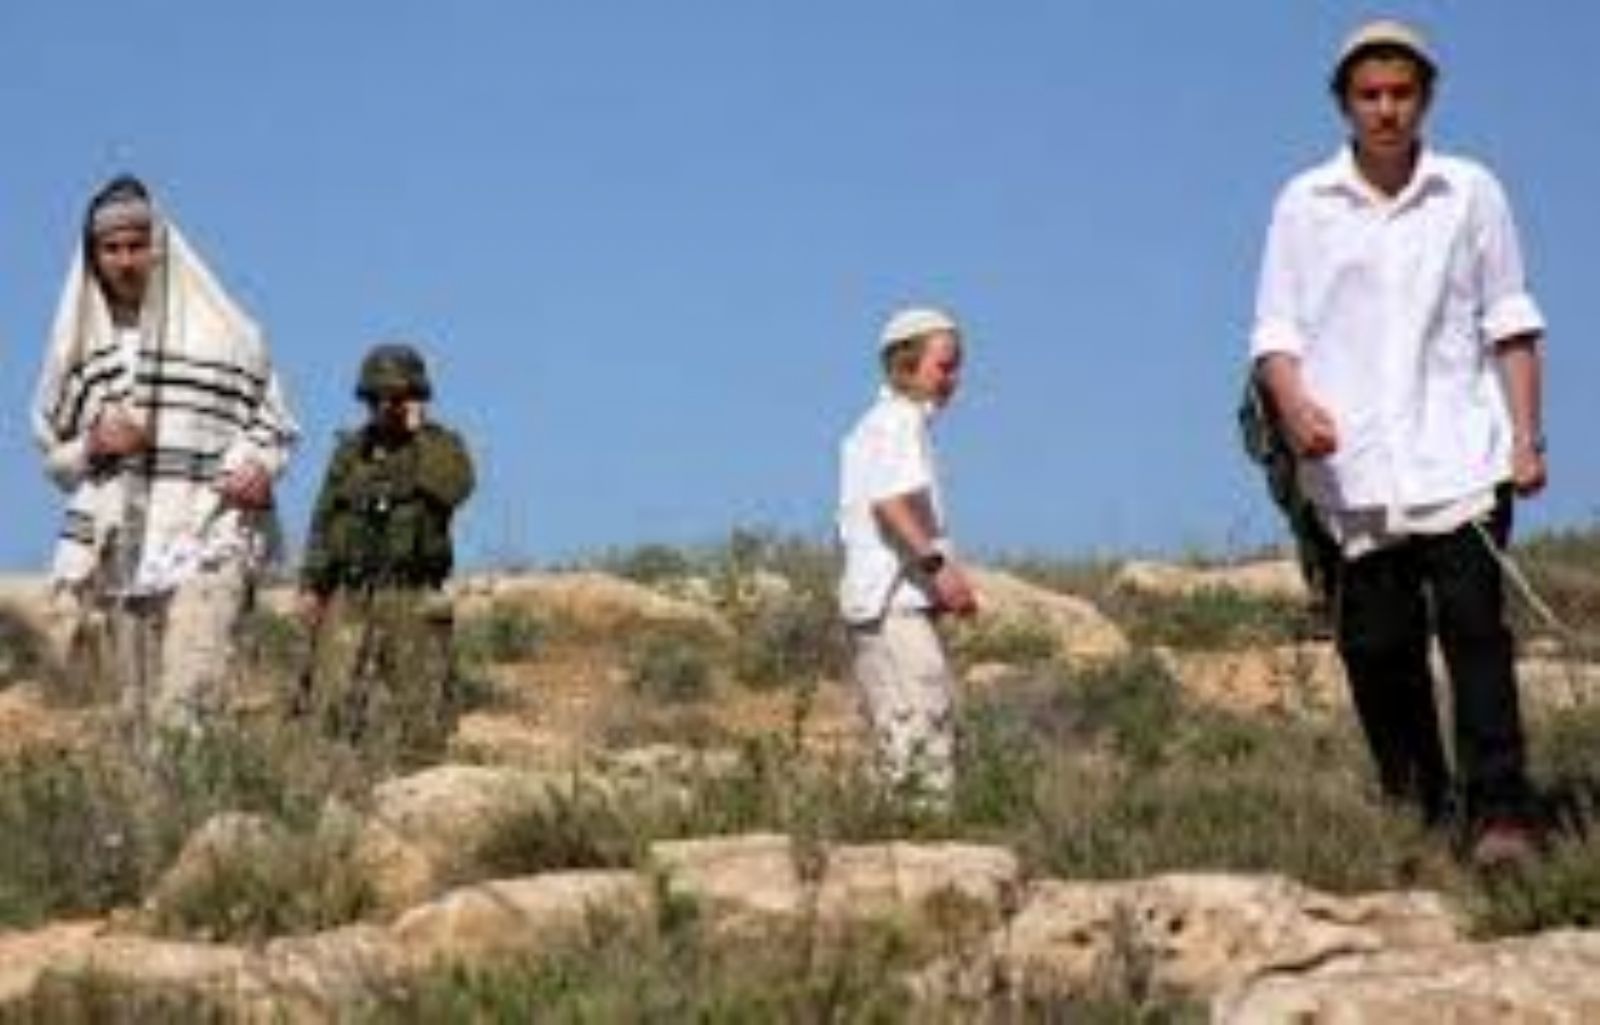 Israeli settlers attempt to abduct Palestinian boys in West Bank